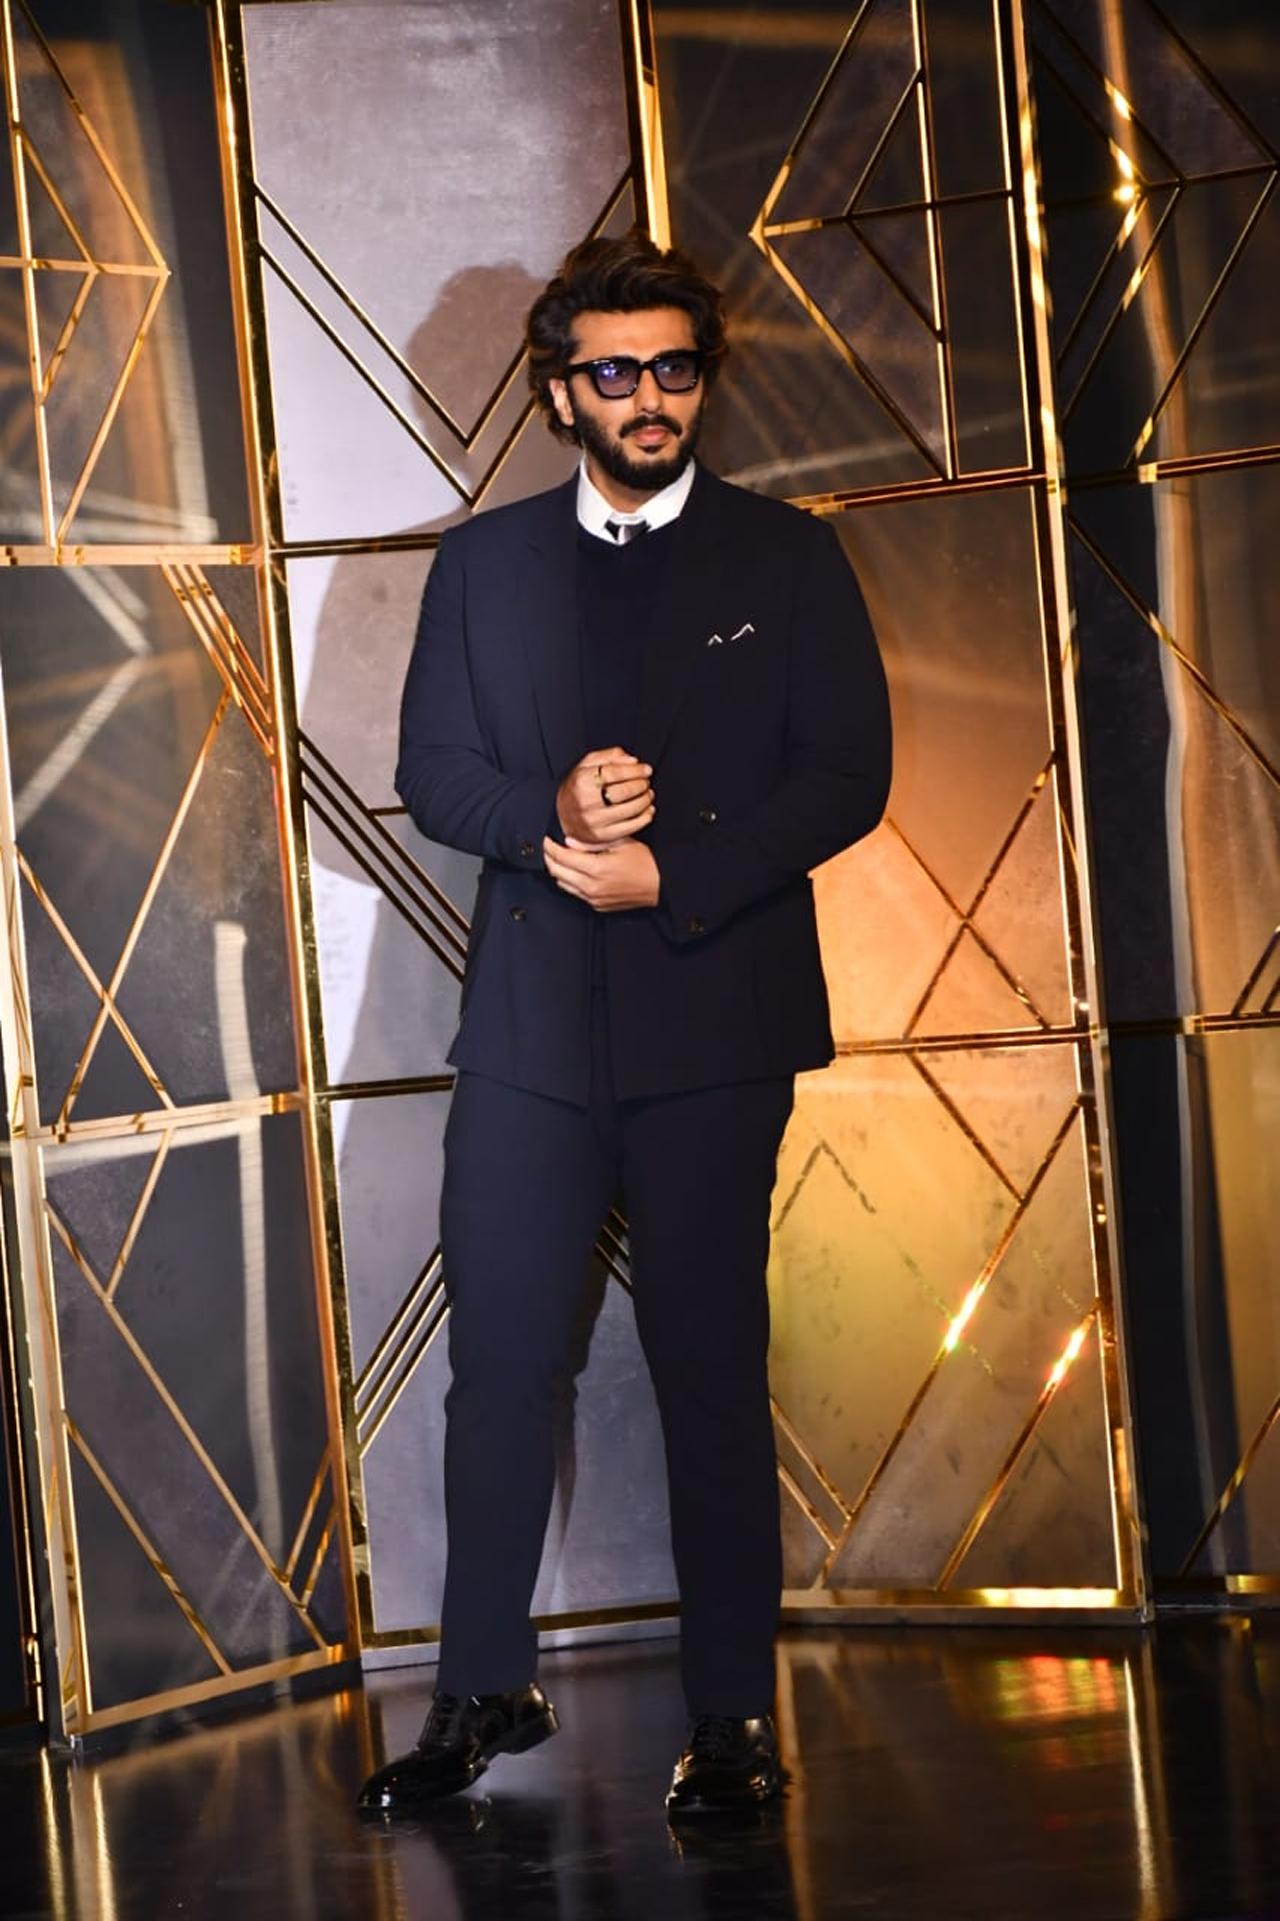 Arjun Kapoor showed off his uber side in a suit as he attended Apoorva Mehta's 50th birthday celebration.